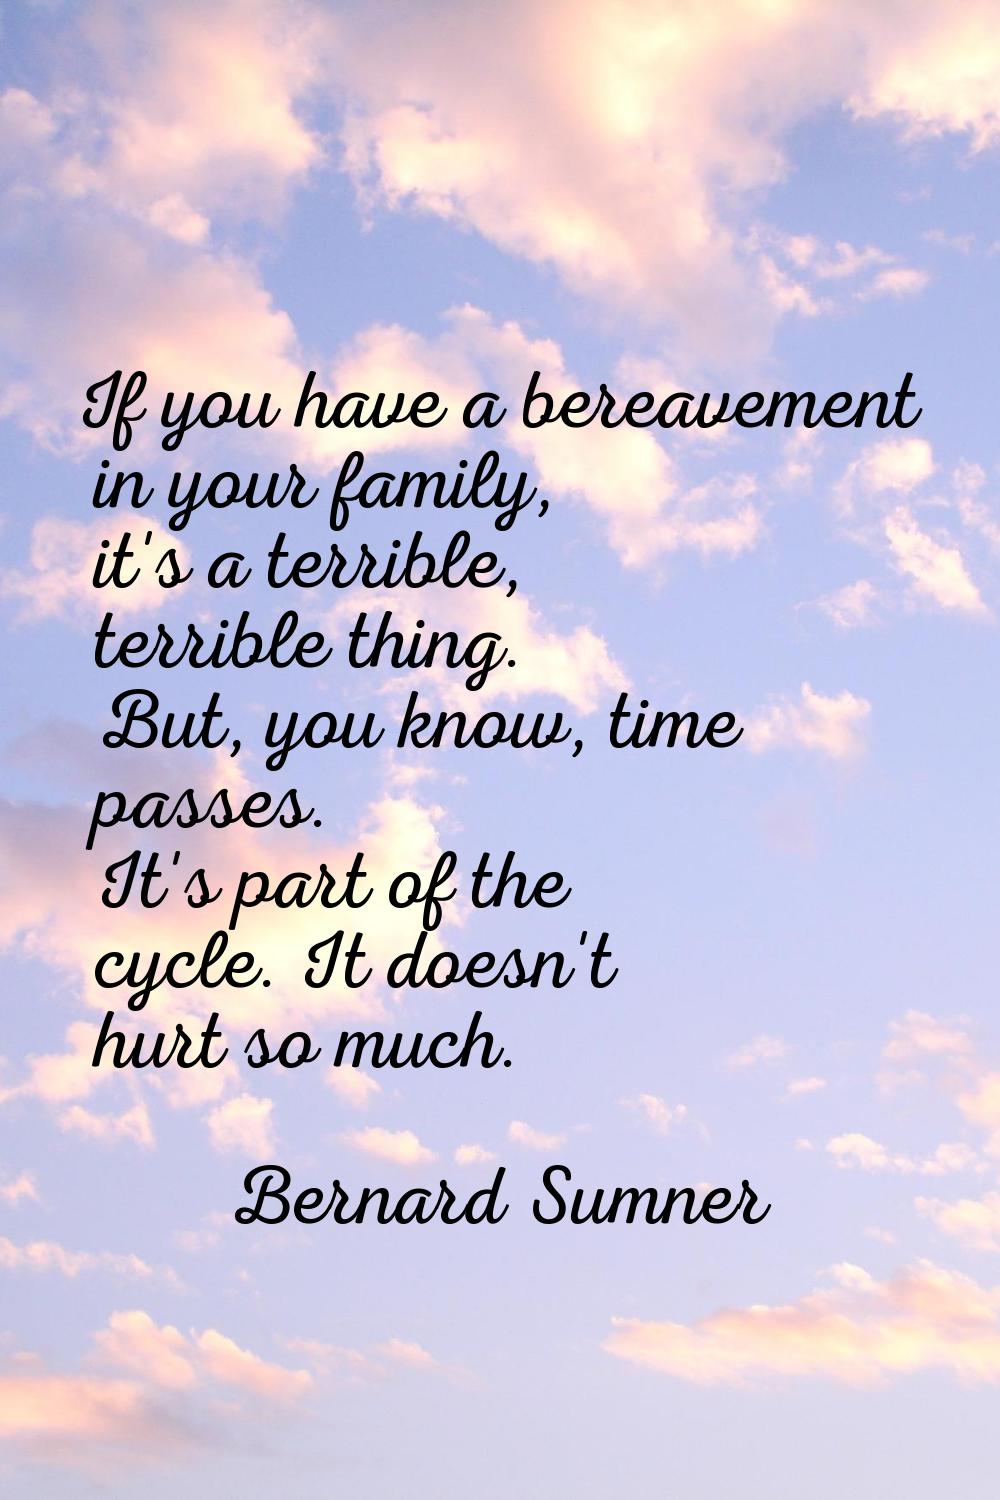 If you have a bereavement in your family, it's a terrible, terrible thing. But, you know, time pass